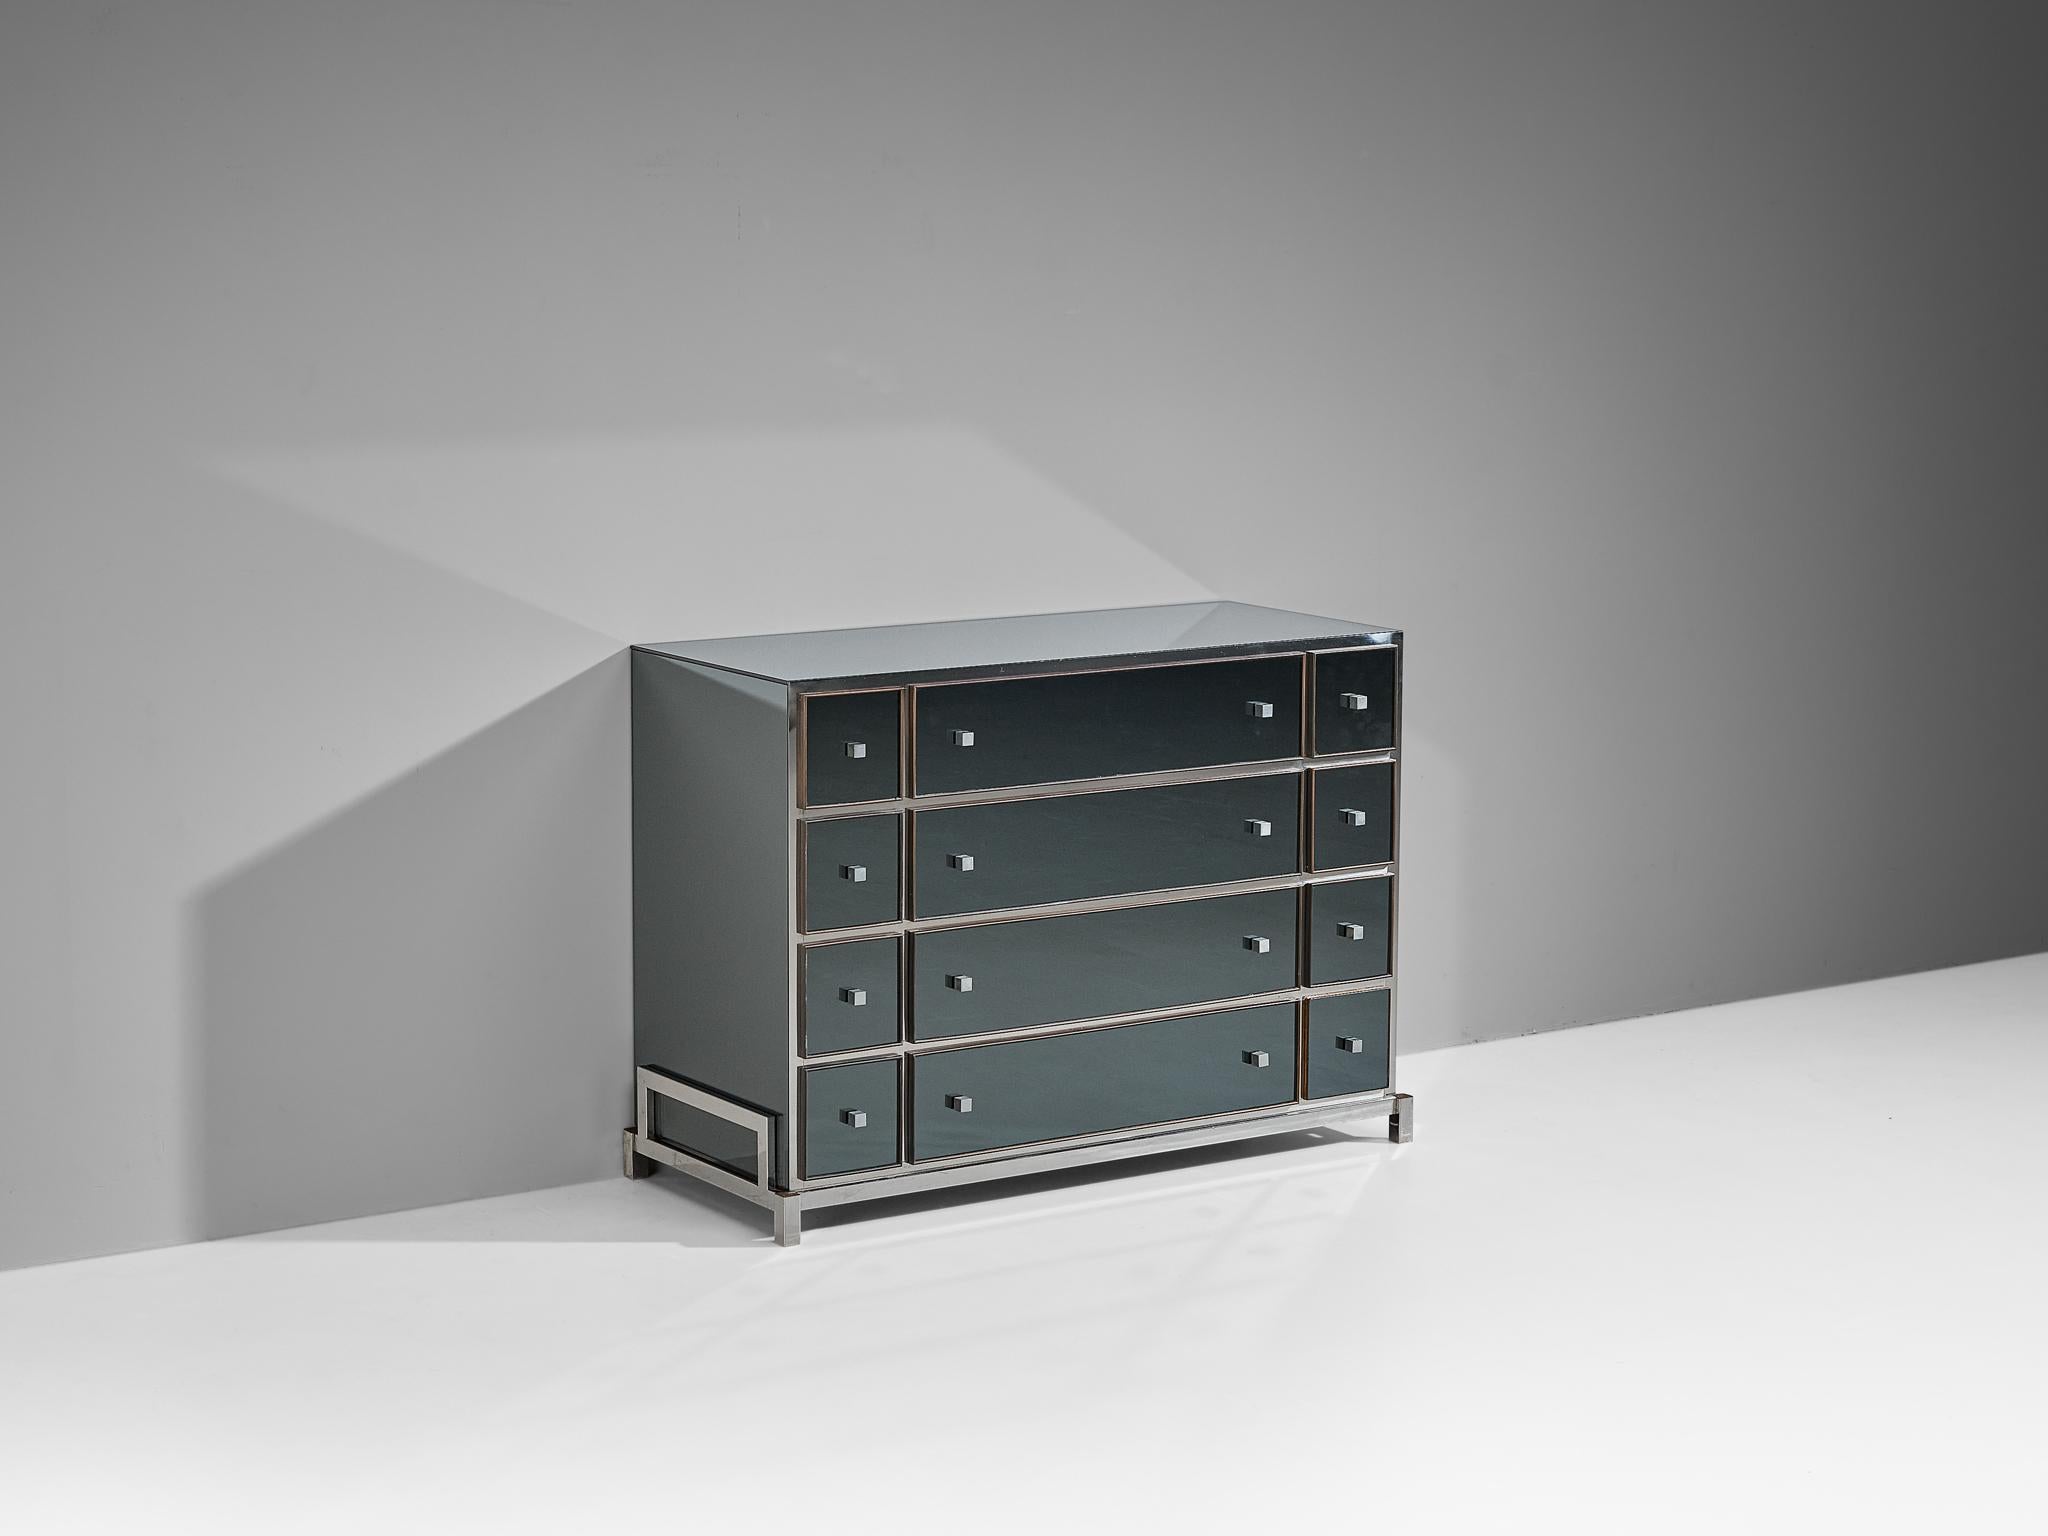 Michel Pigneres, chest of drawers, brass, chrome-plated steel, mirrored glass, France, circa 1968.

This exquisite cabinet is beautifully designed featuring a nice structure of sharp lines and geometrical shapes. This item is exemplary for refined,